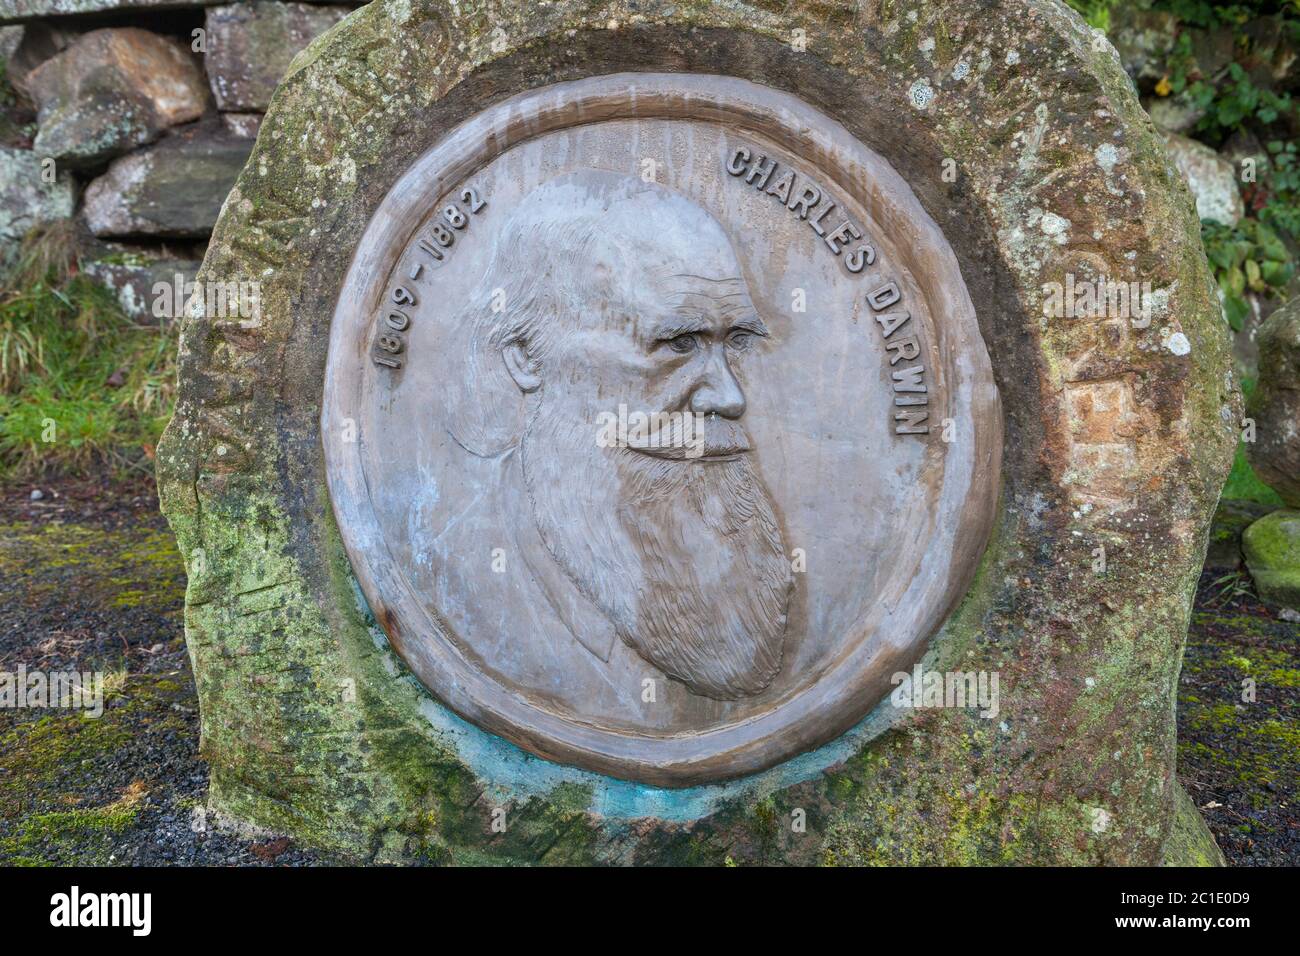 A plaque commemorating Charles Darwin's visit to Ilkley, West Yorkshire located in the Darwin Gardens Millennium Green Stock Photo